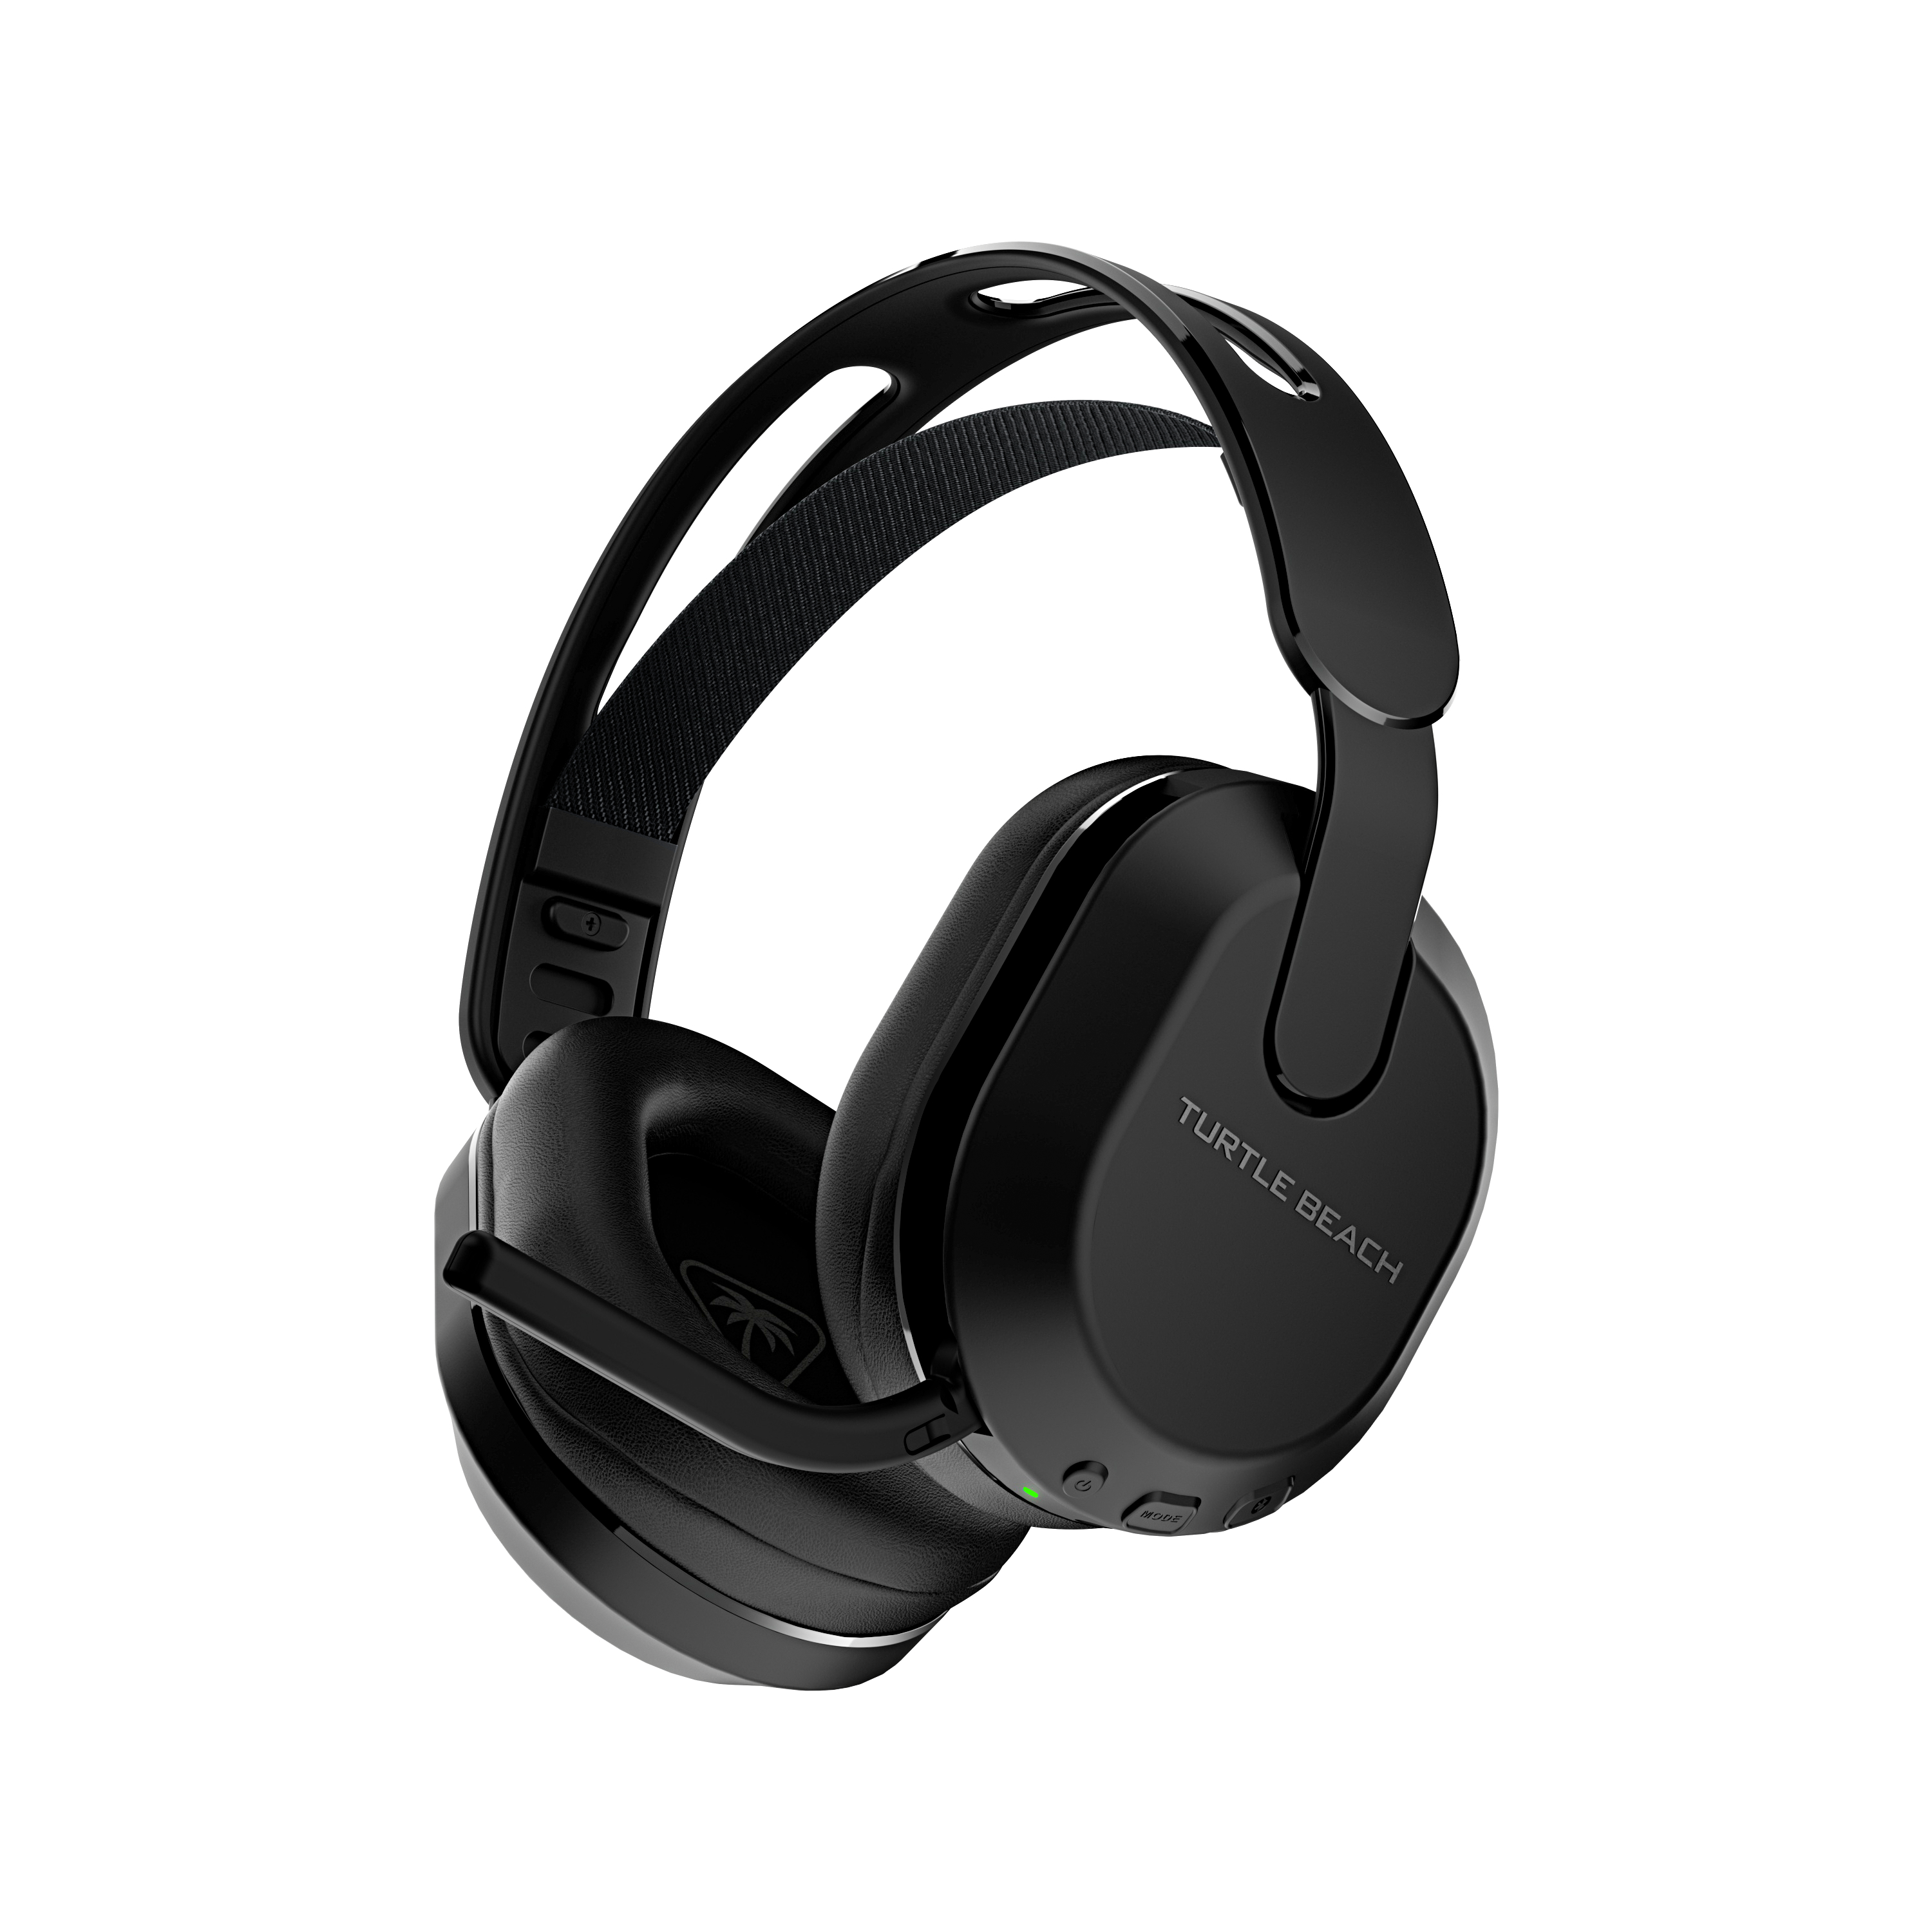 TURTLE BEACH Stealth 500, Black TBS-5104-05 Wireless Headset for PC